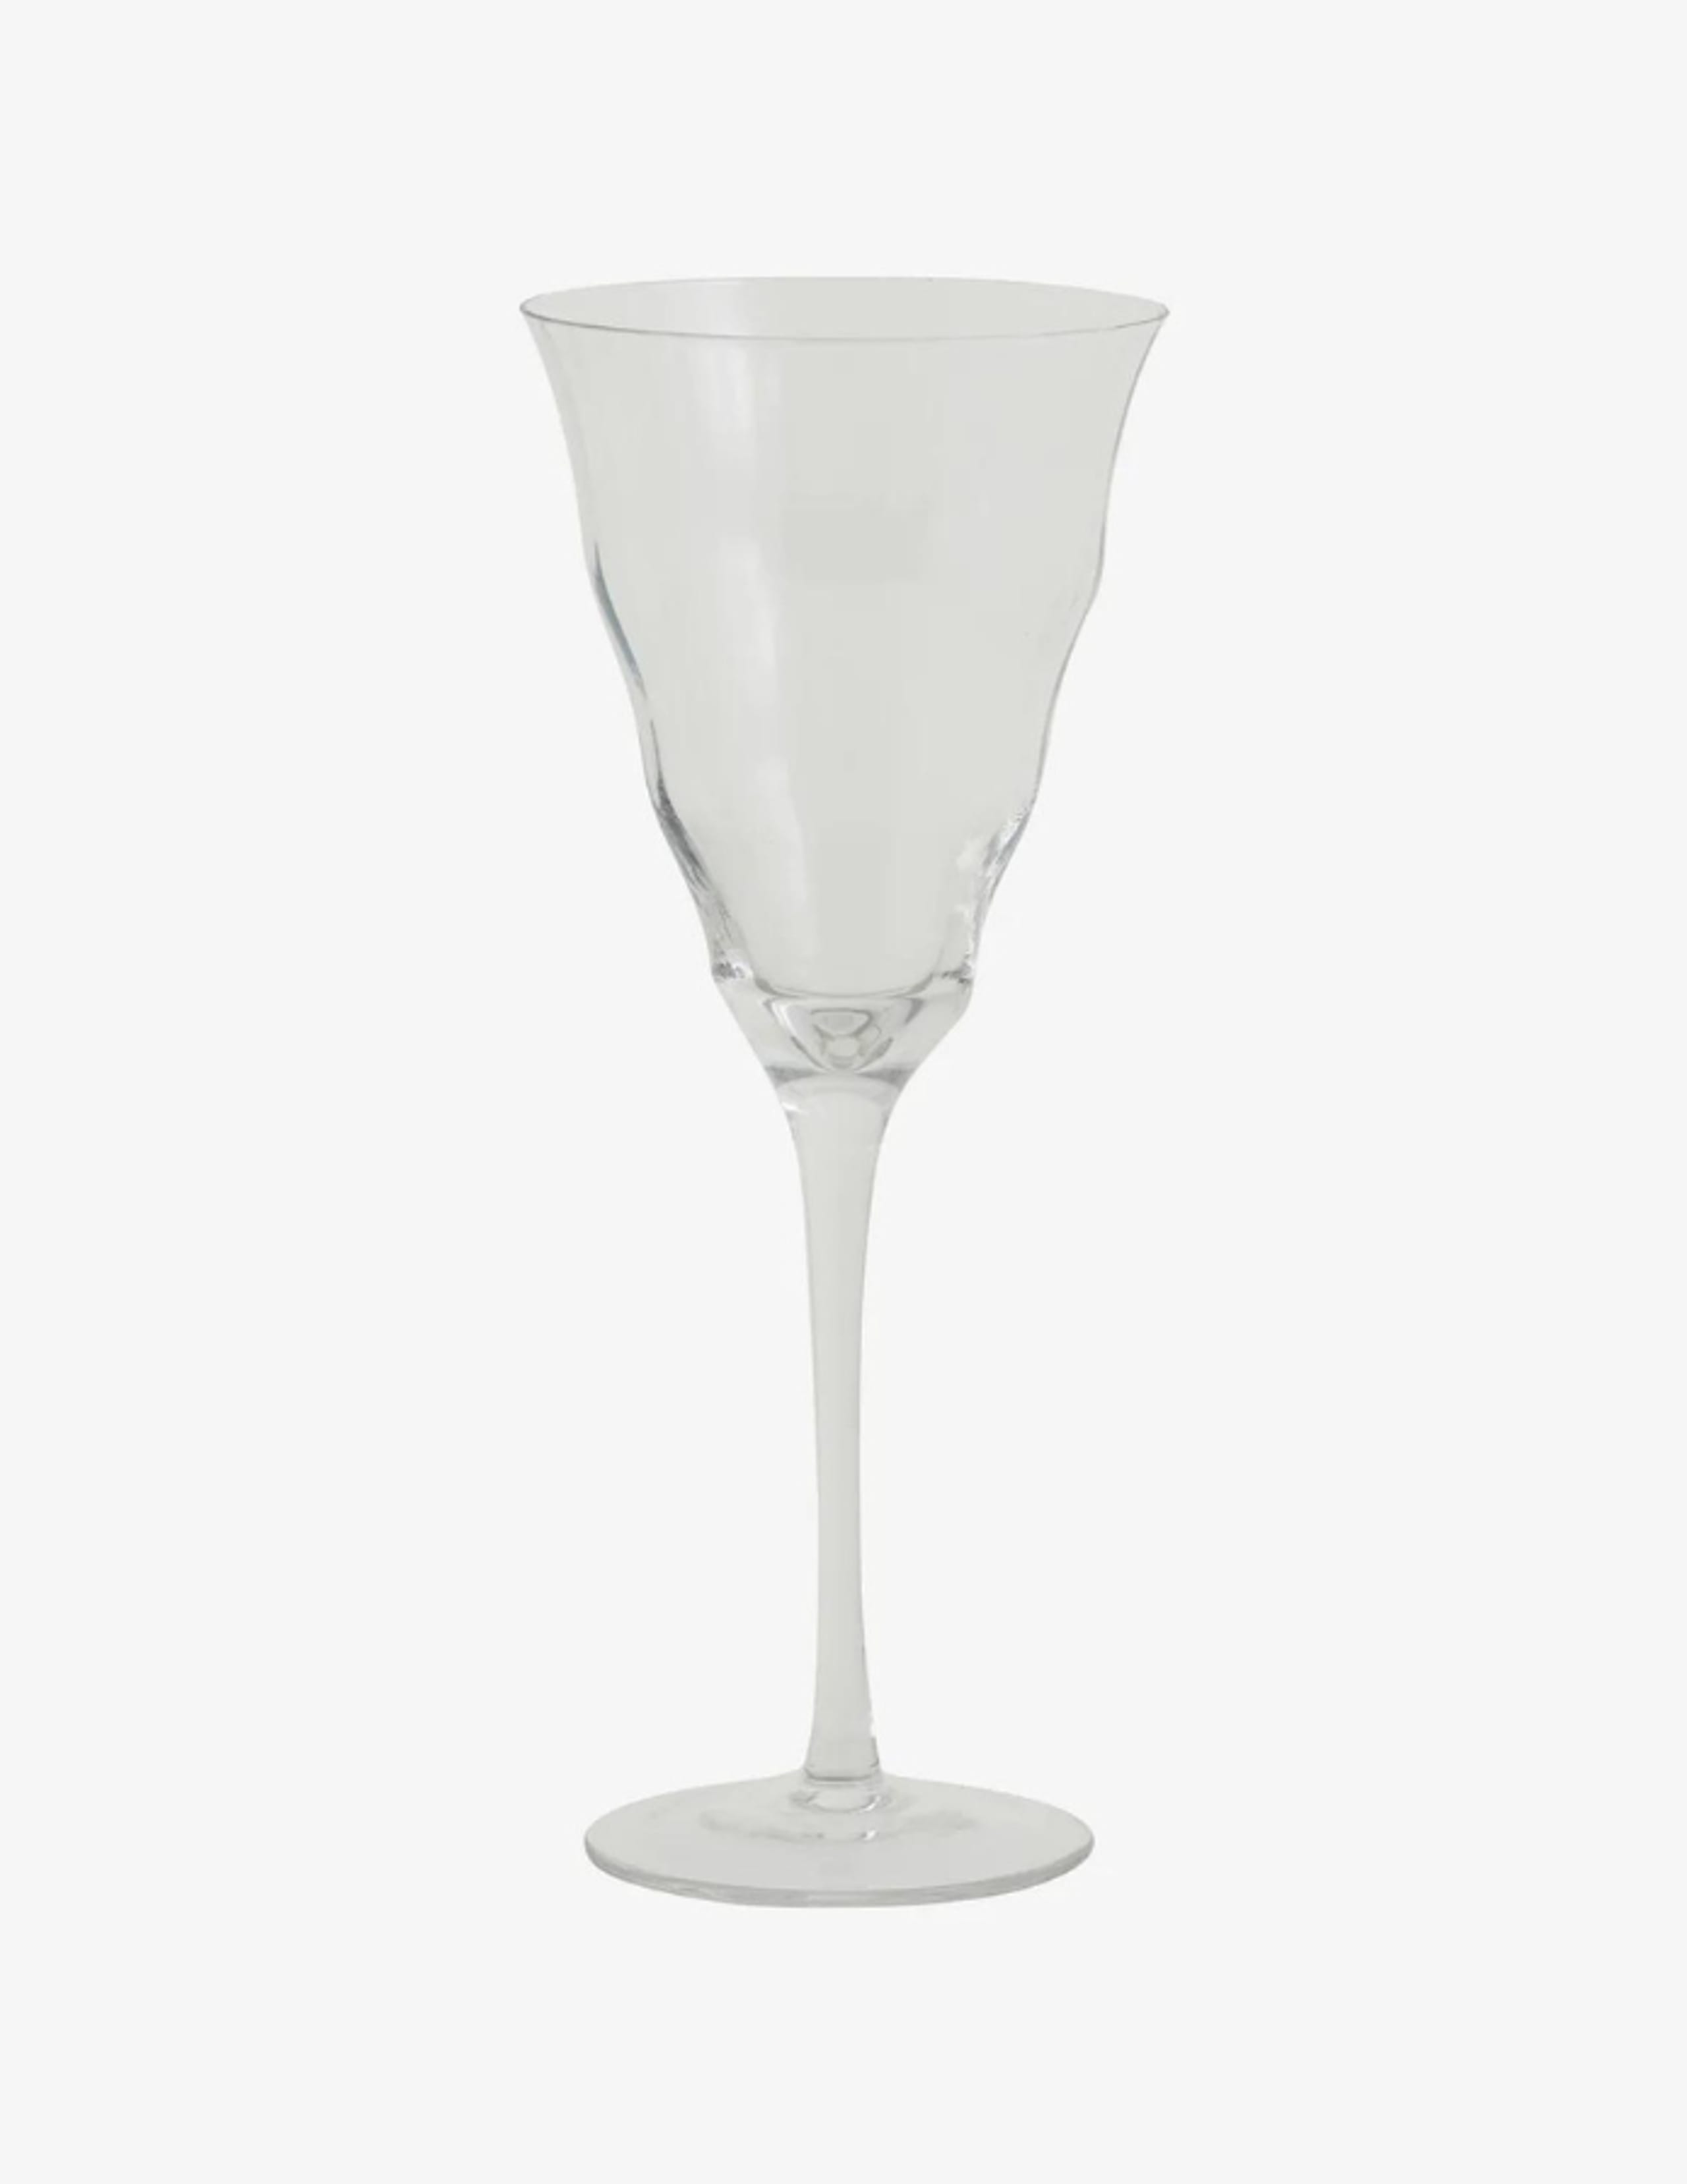 Nordal - Glas - Opia Cocktail Glass - Clear - 360 ml.